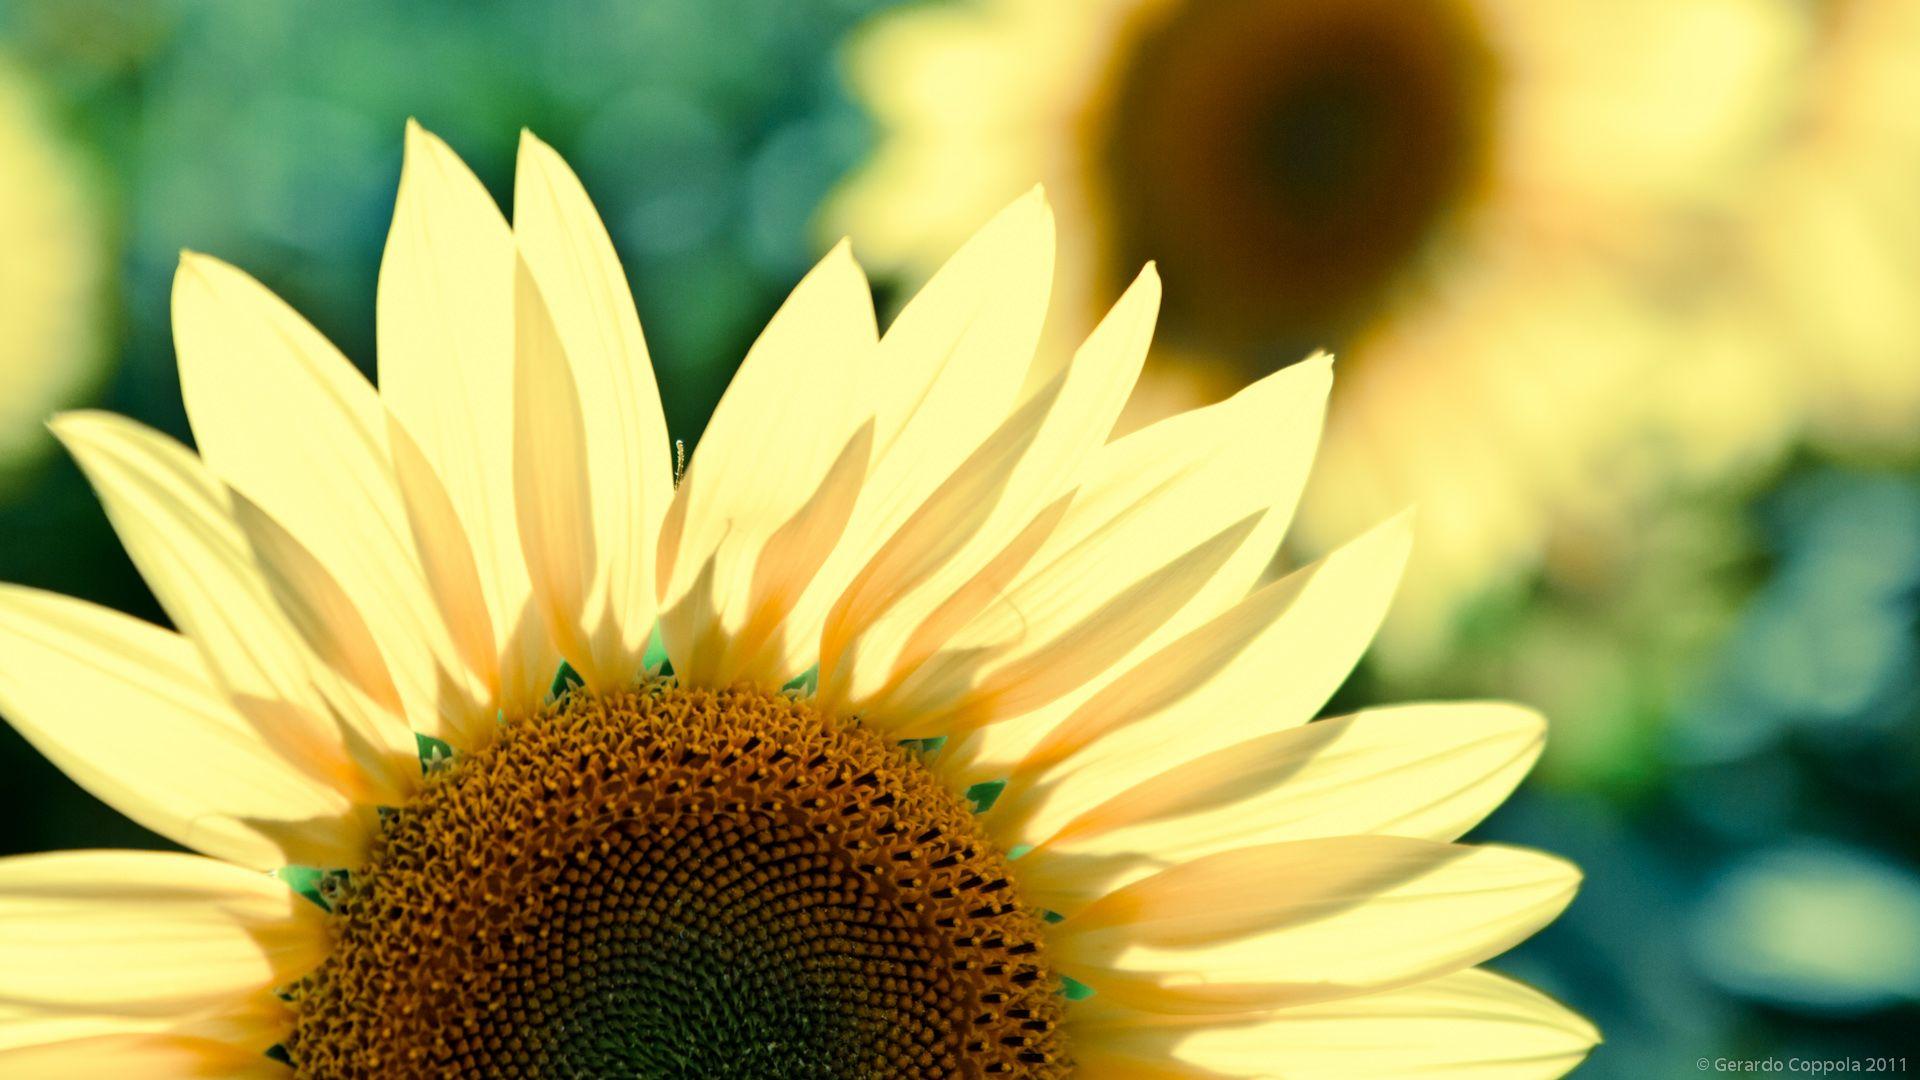 Beautiful Fall Sunflower Wallpapers Top Free Beautiful Fall Sunflower Backgrounds 8144